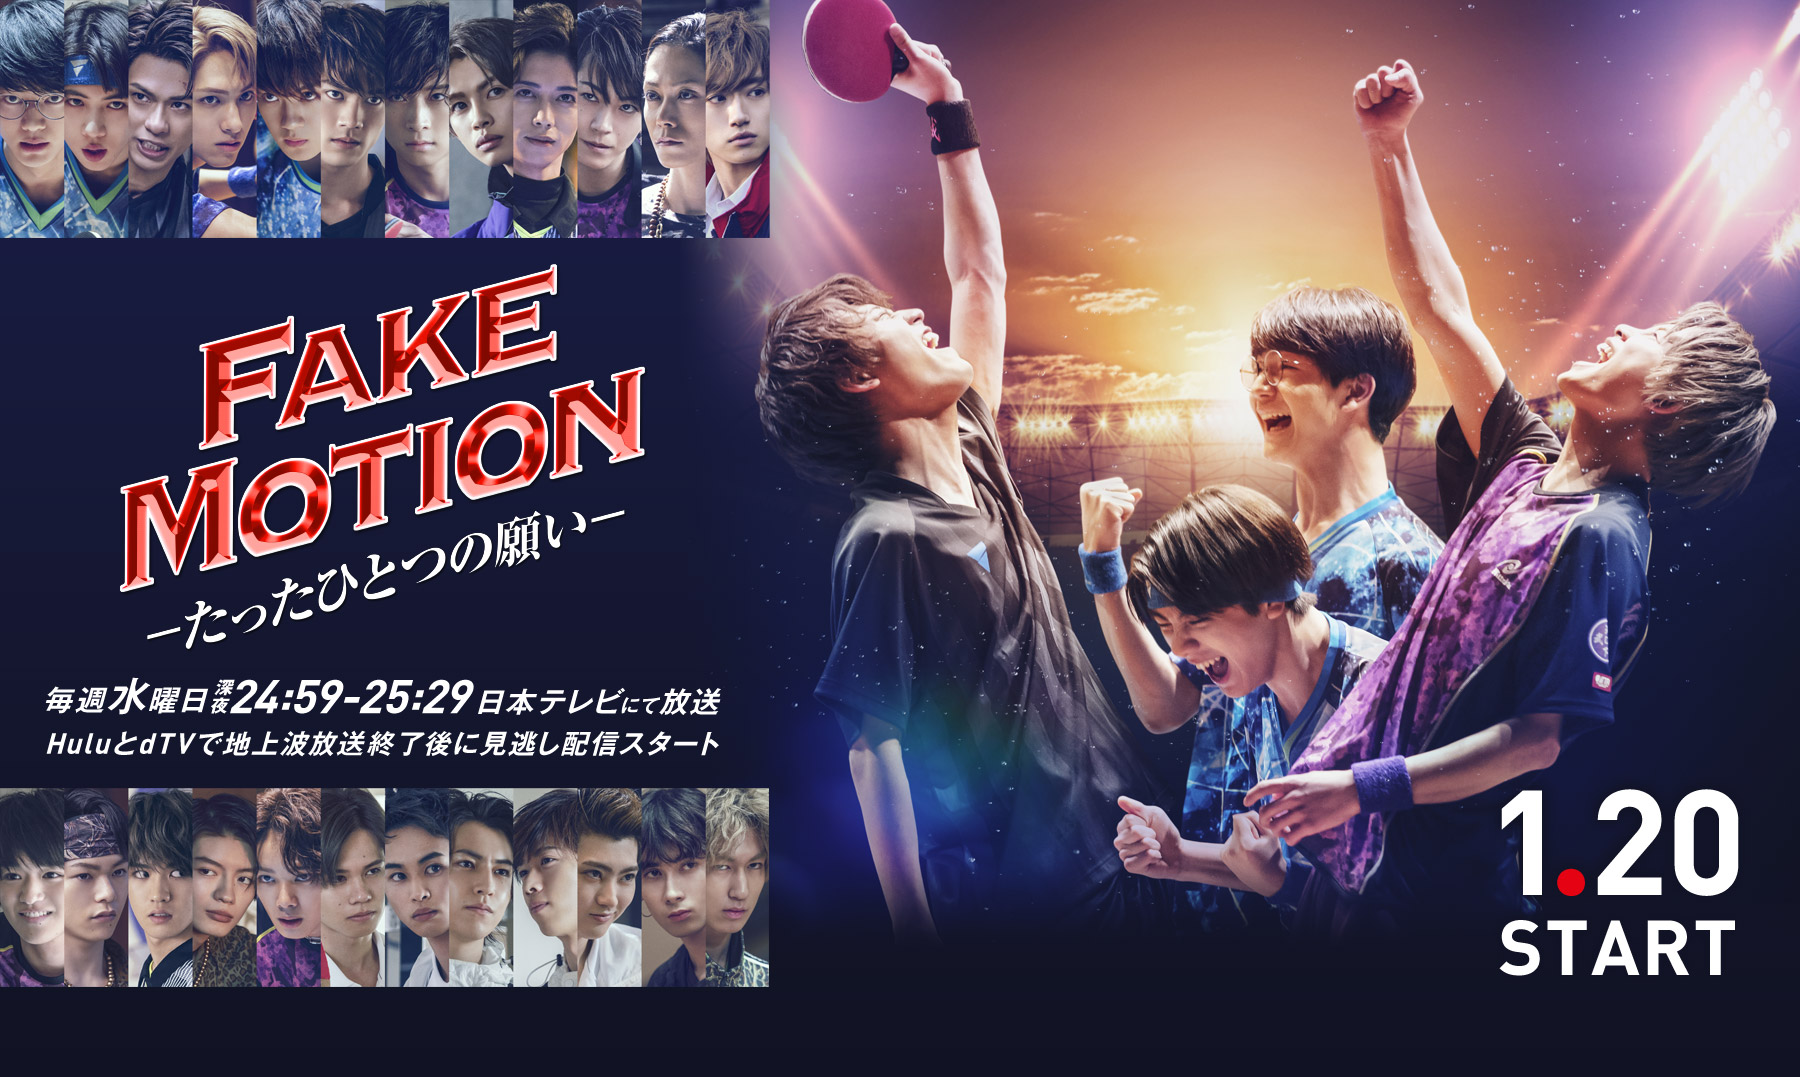 STAGE | FAKE MOTION -THE SUPER STAGE-